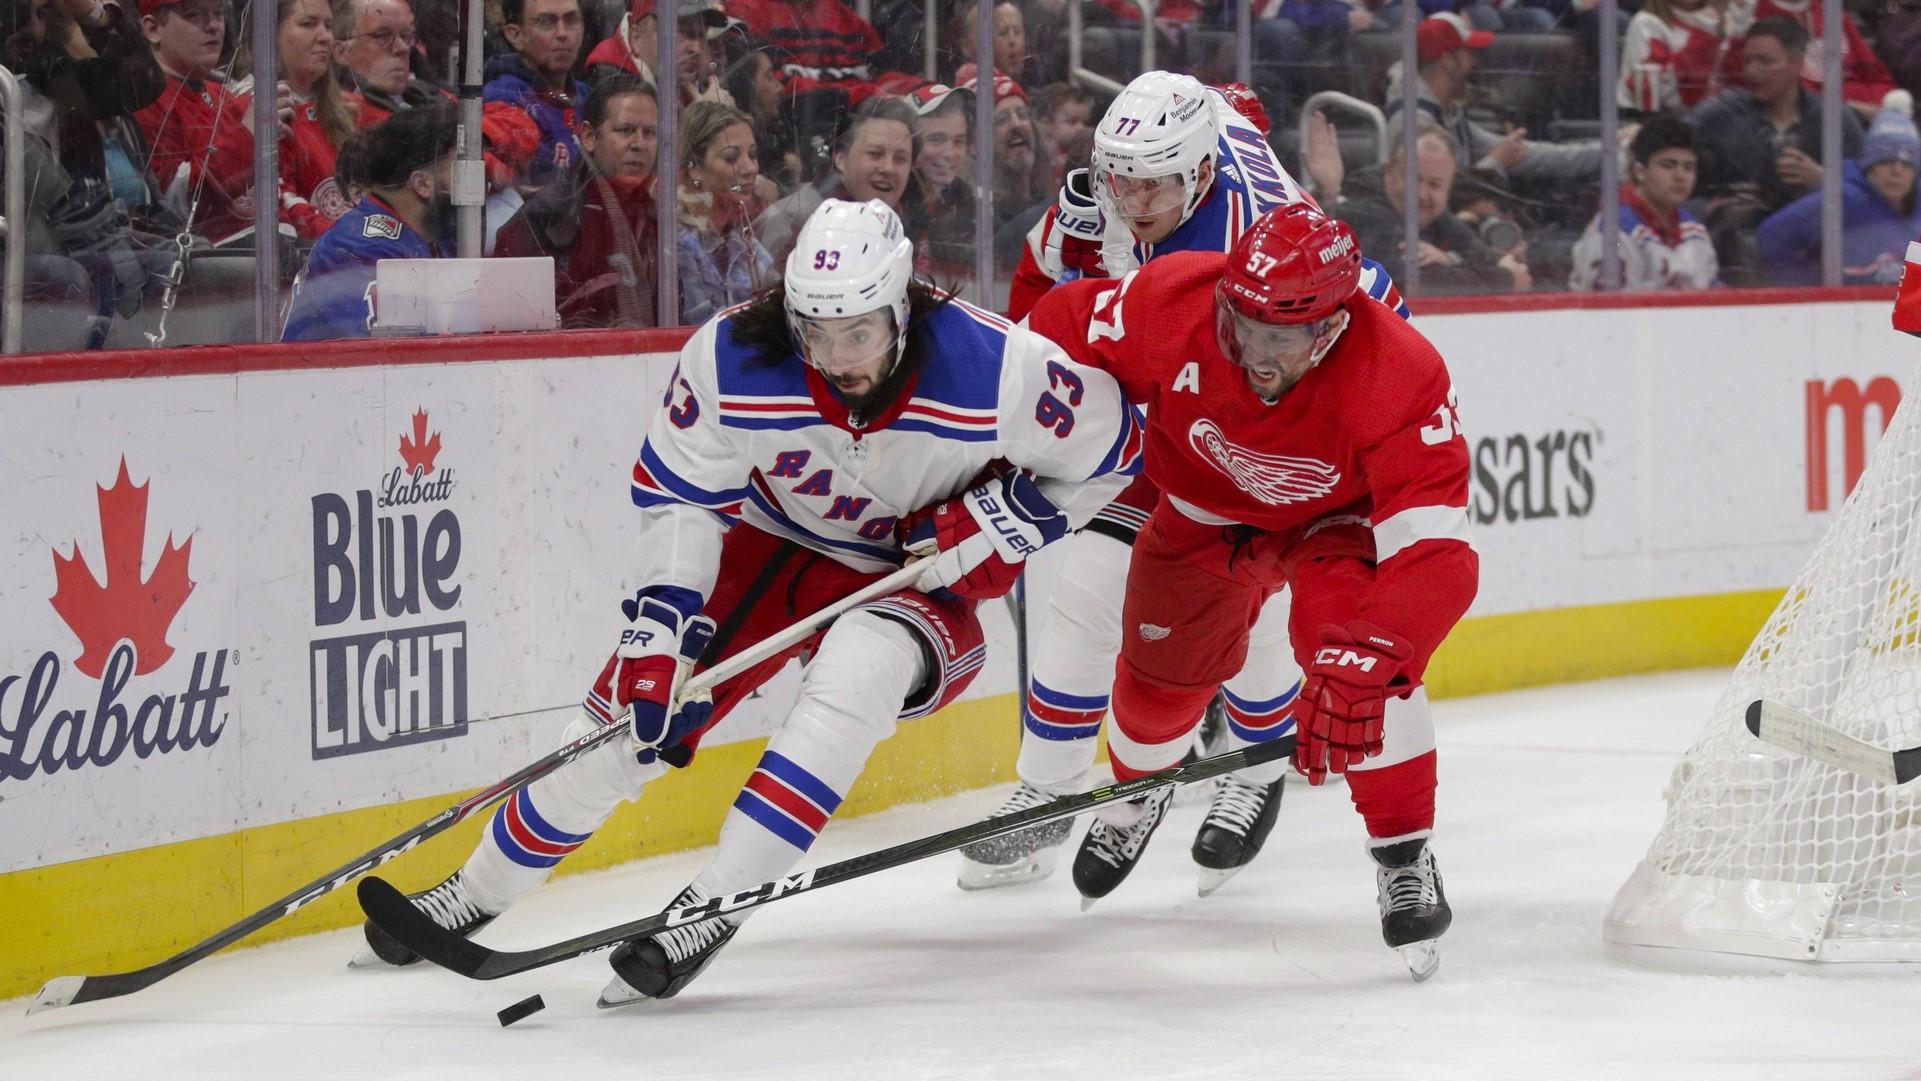 Feb 23, 2023; Detroit, Michigan, USA; New York Rangers center Mika Zibanejad (93) and Detroit Red Wings left wing David Perron (57) fight for control of the puck during the second period at Little Caesars Arena. / Brian Bradshaw Sevald-USA TODAY Sports